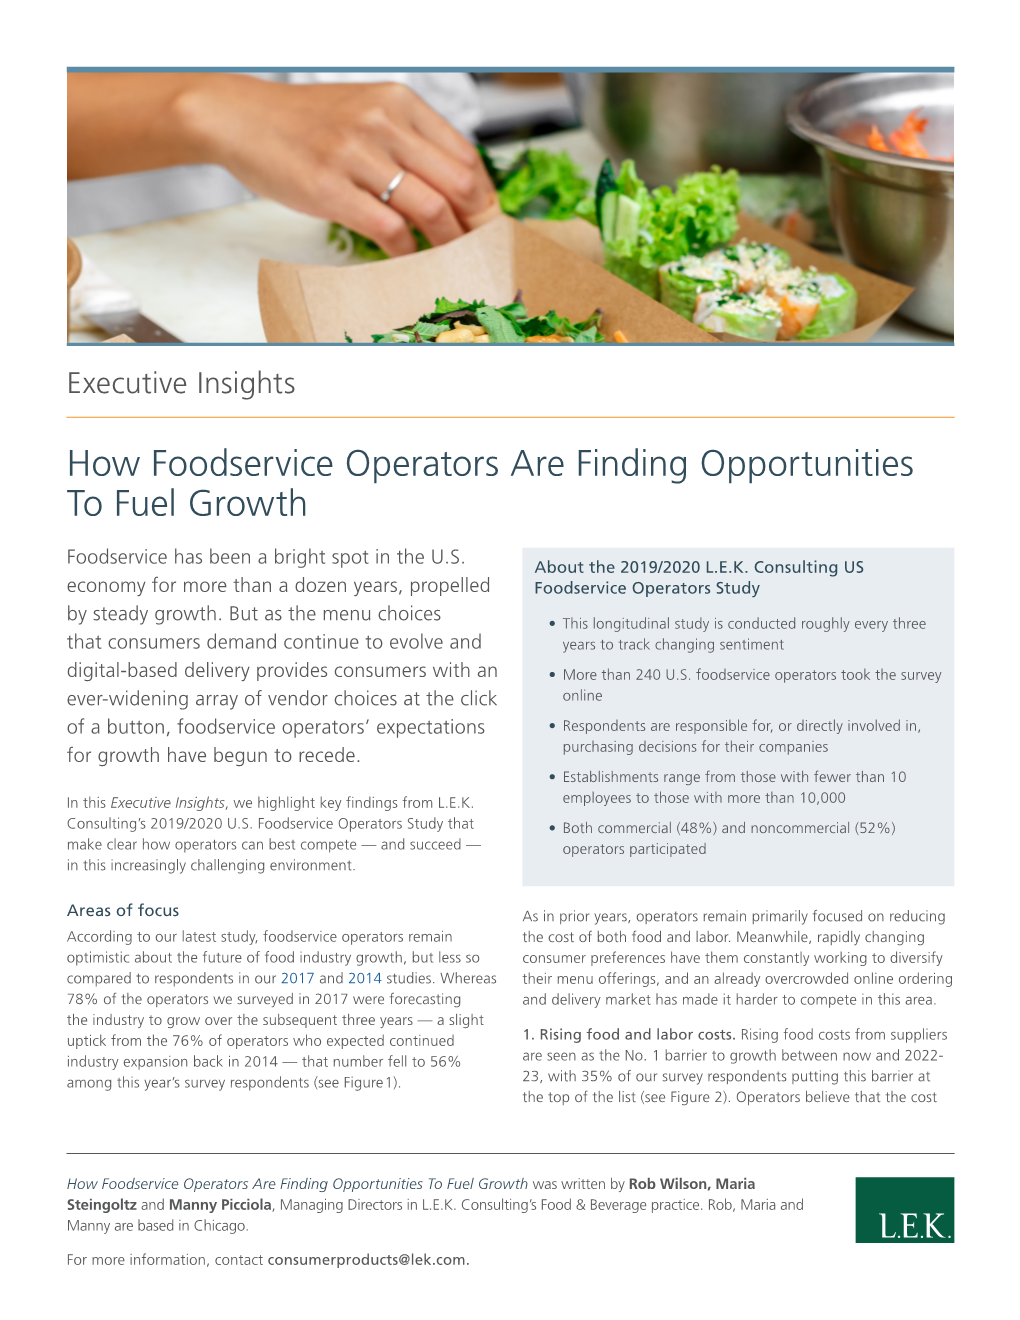 How Foodservice Operators Are Finding Opportunities to Fuel Growth